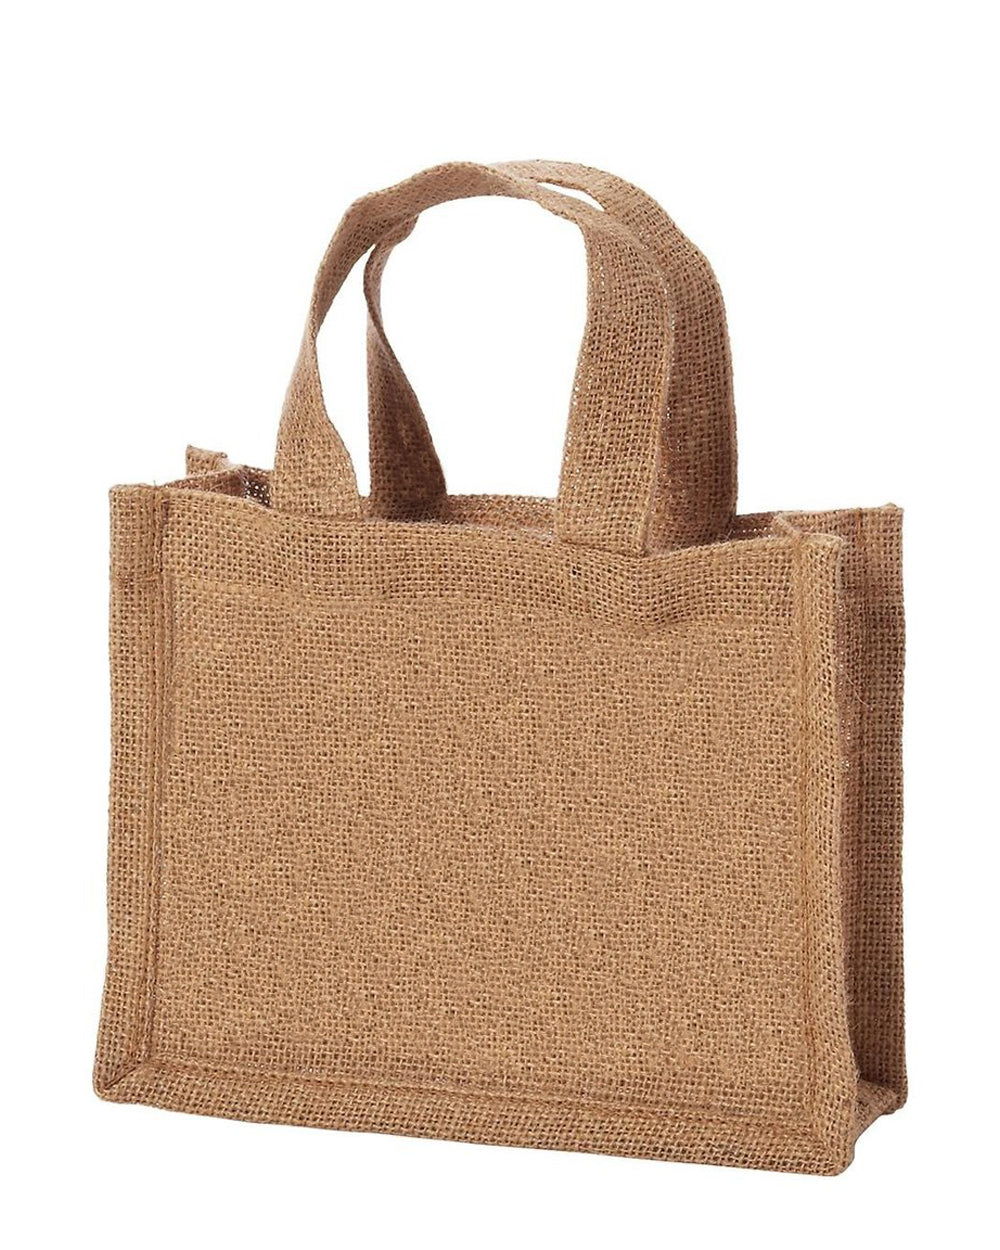 Share more than 176 small burlap gift bags super hot